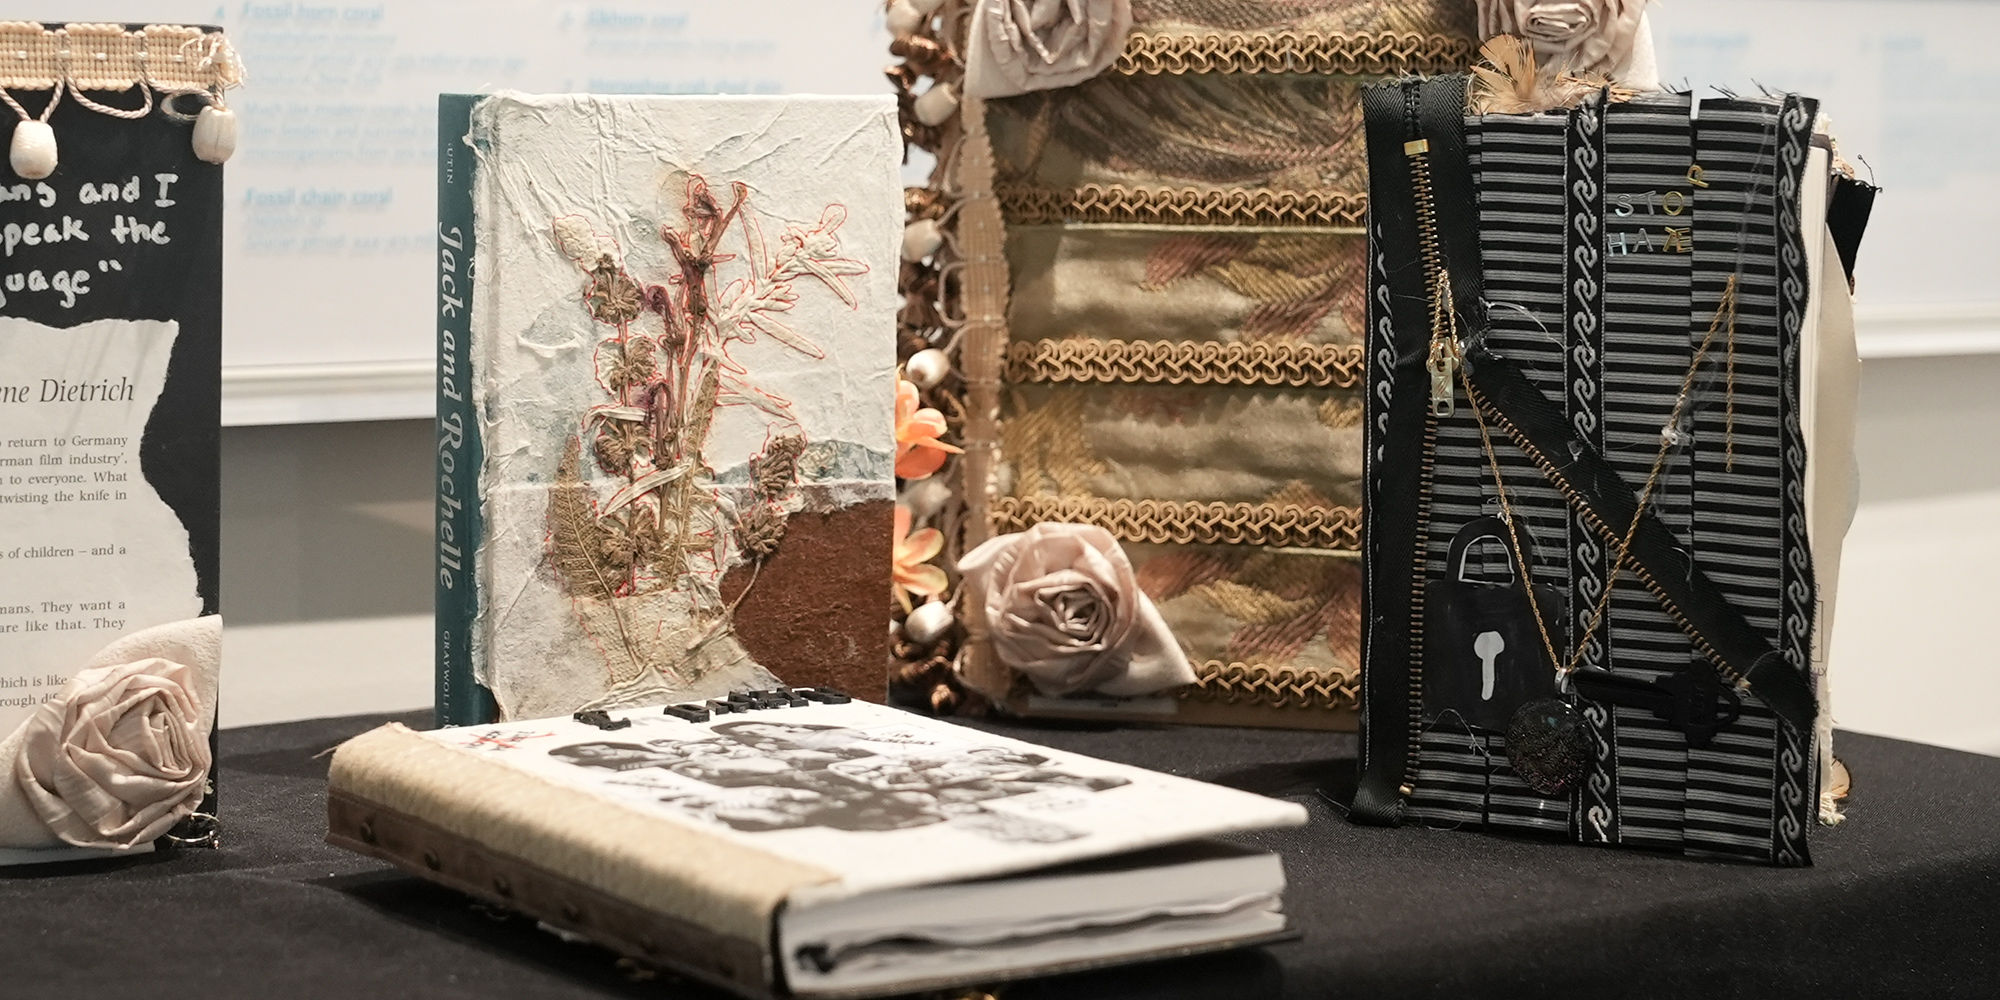 Books that have been artistically altered displayed on a table.